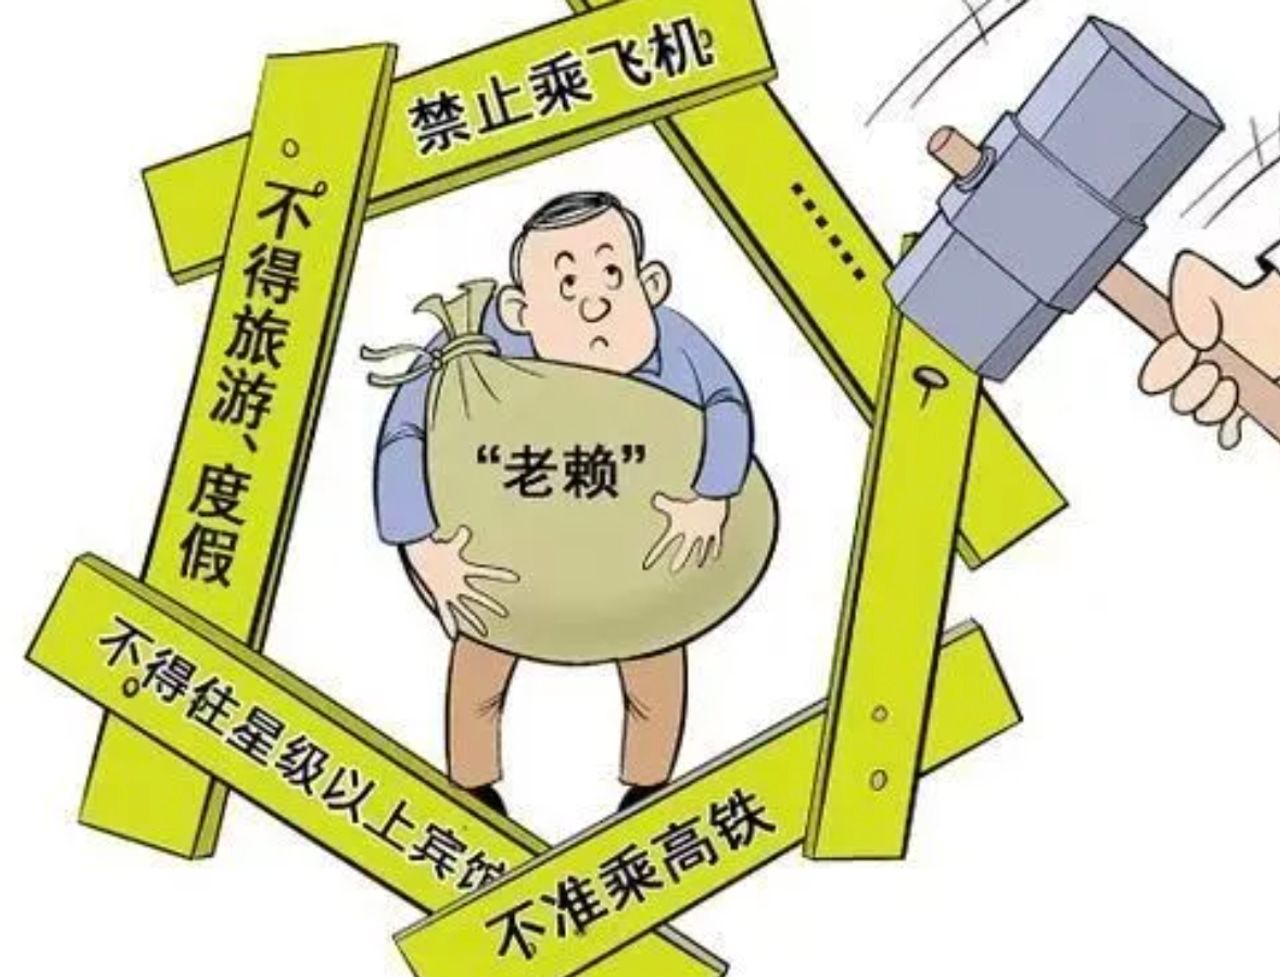 china’s punishment for people with bad debts: no fast trains or nice hotels